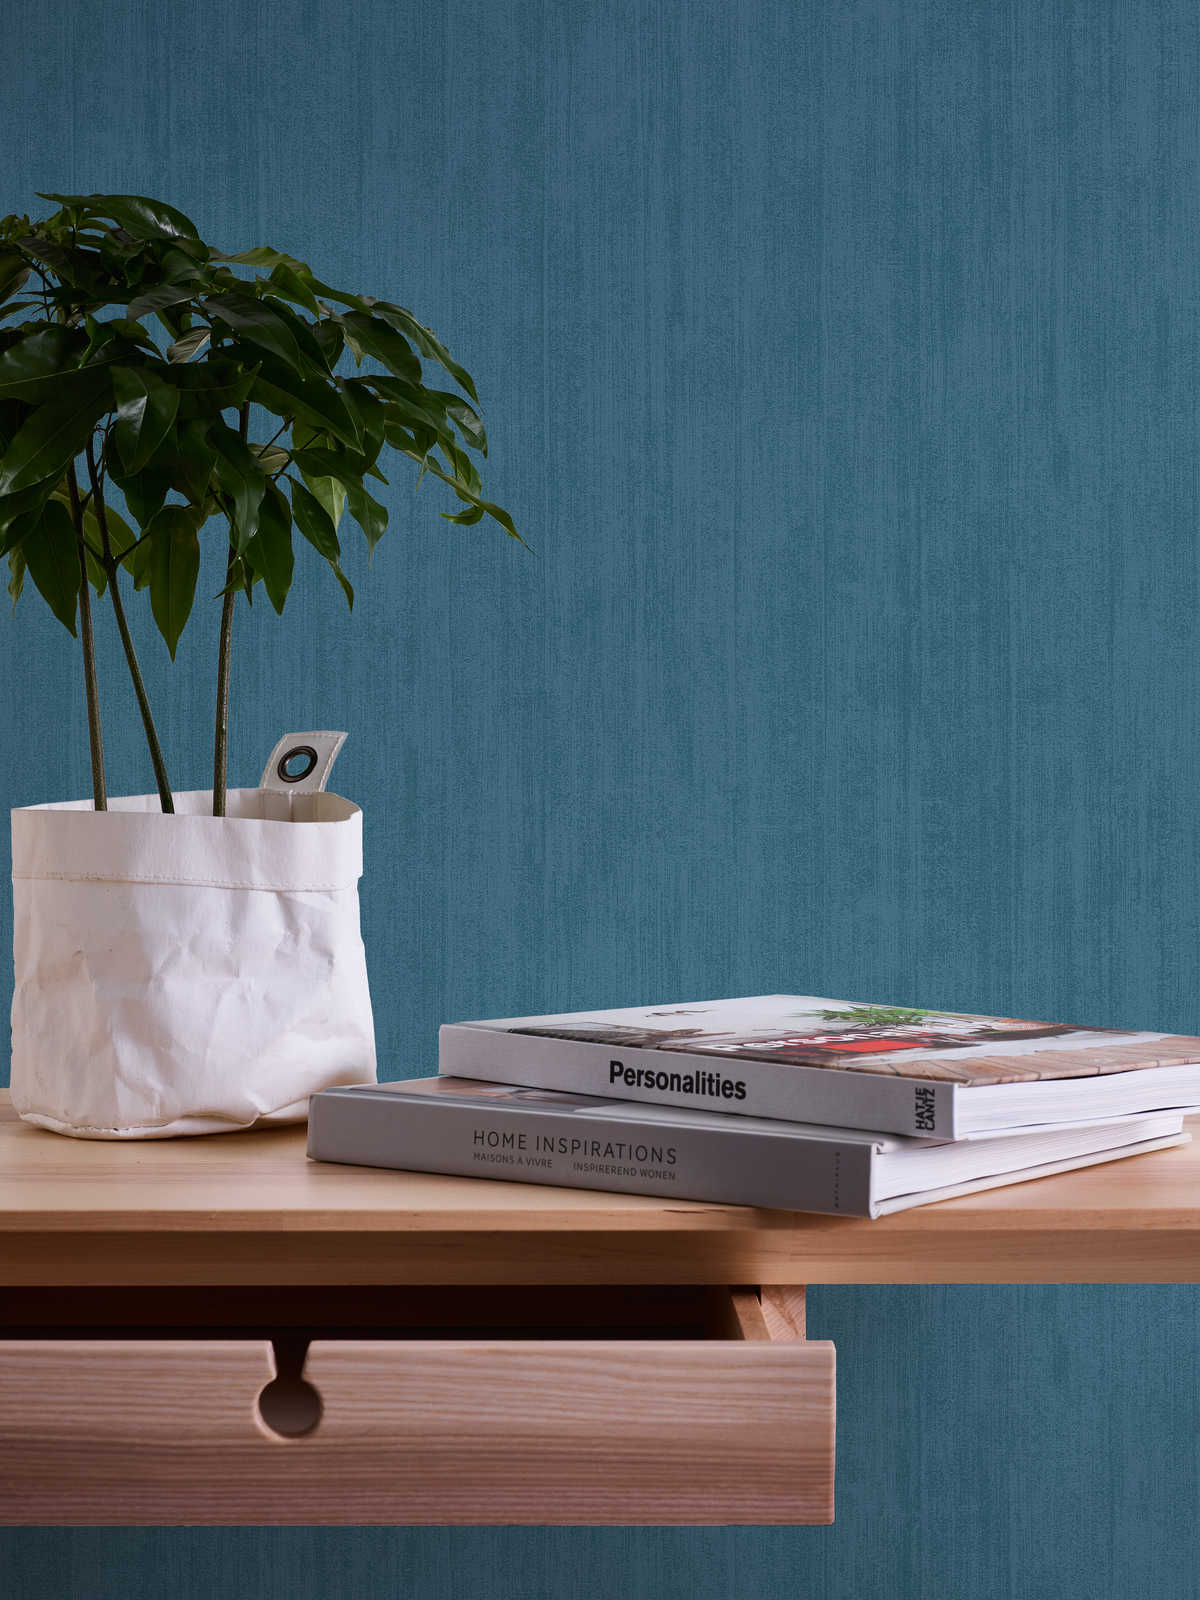             Plain non-woven wallpaper with tone-on-tone hatching - blue
        